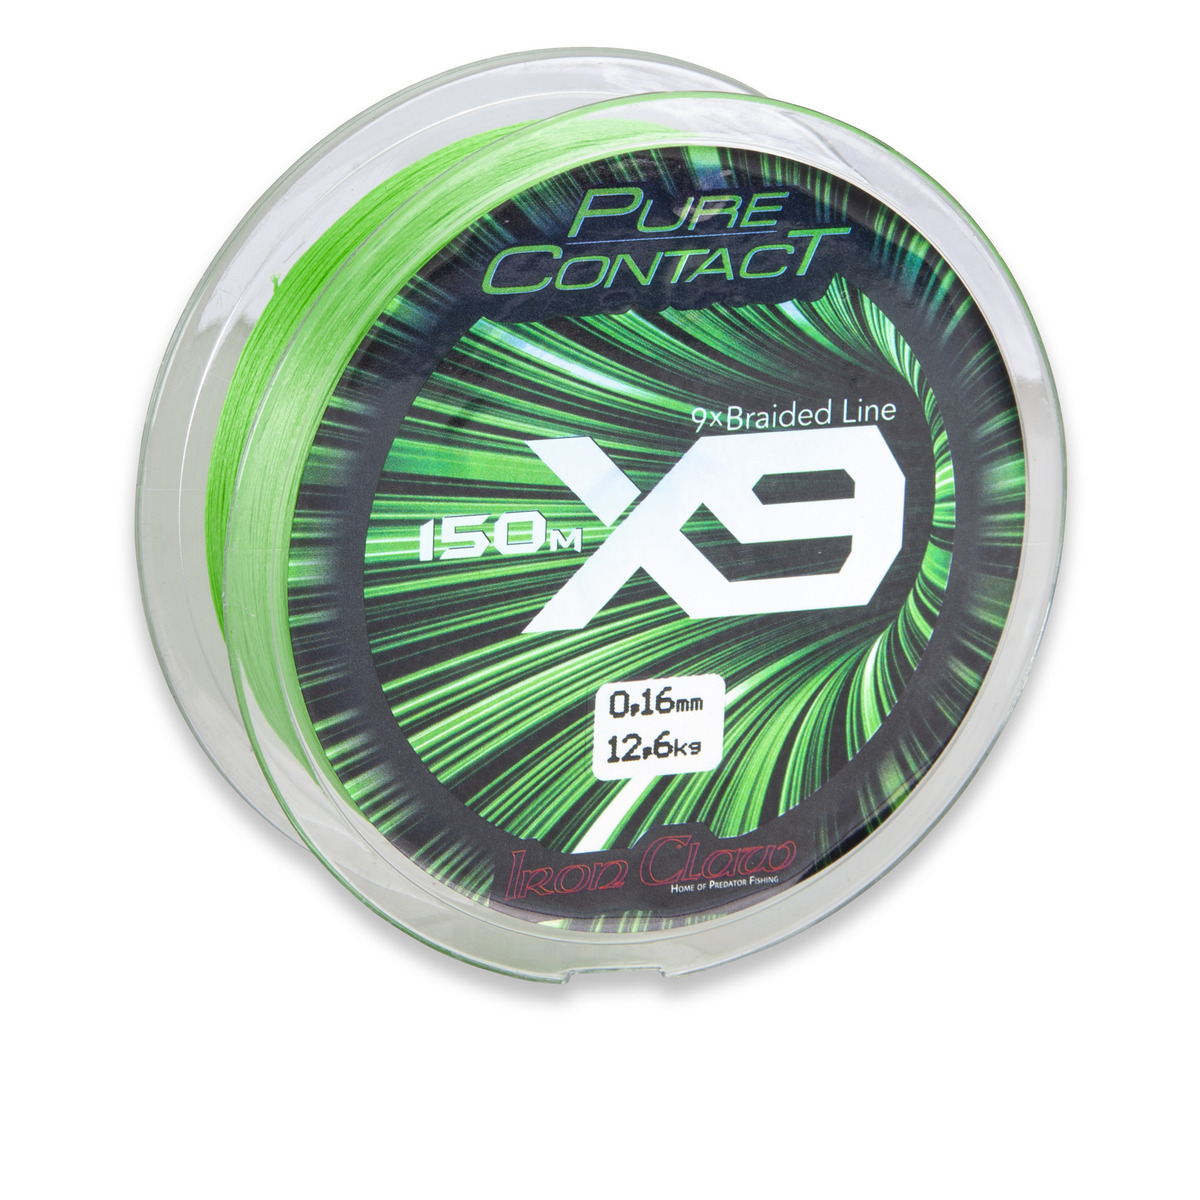 Iron Claw Pure Contact X9 Green - 1500 m 0,16 mm